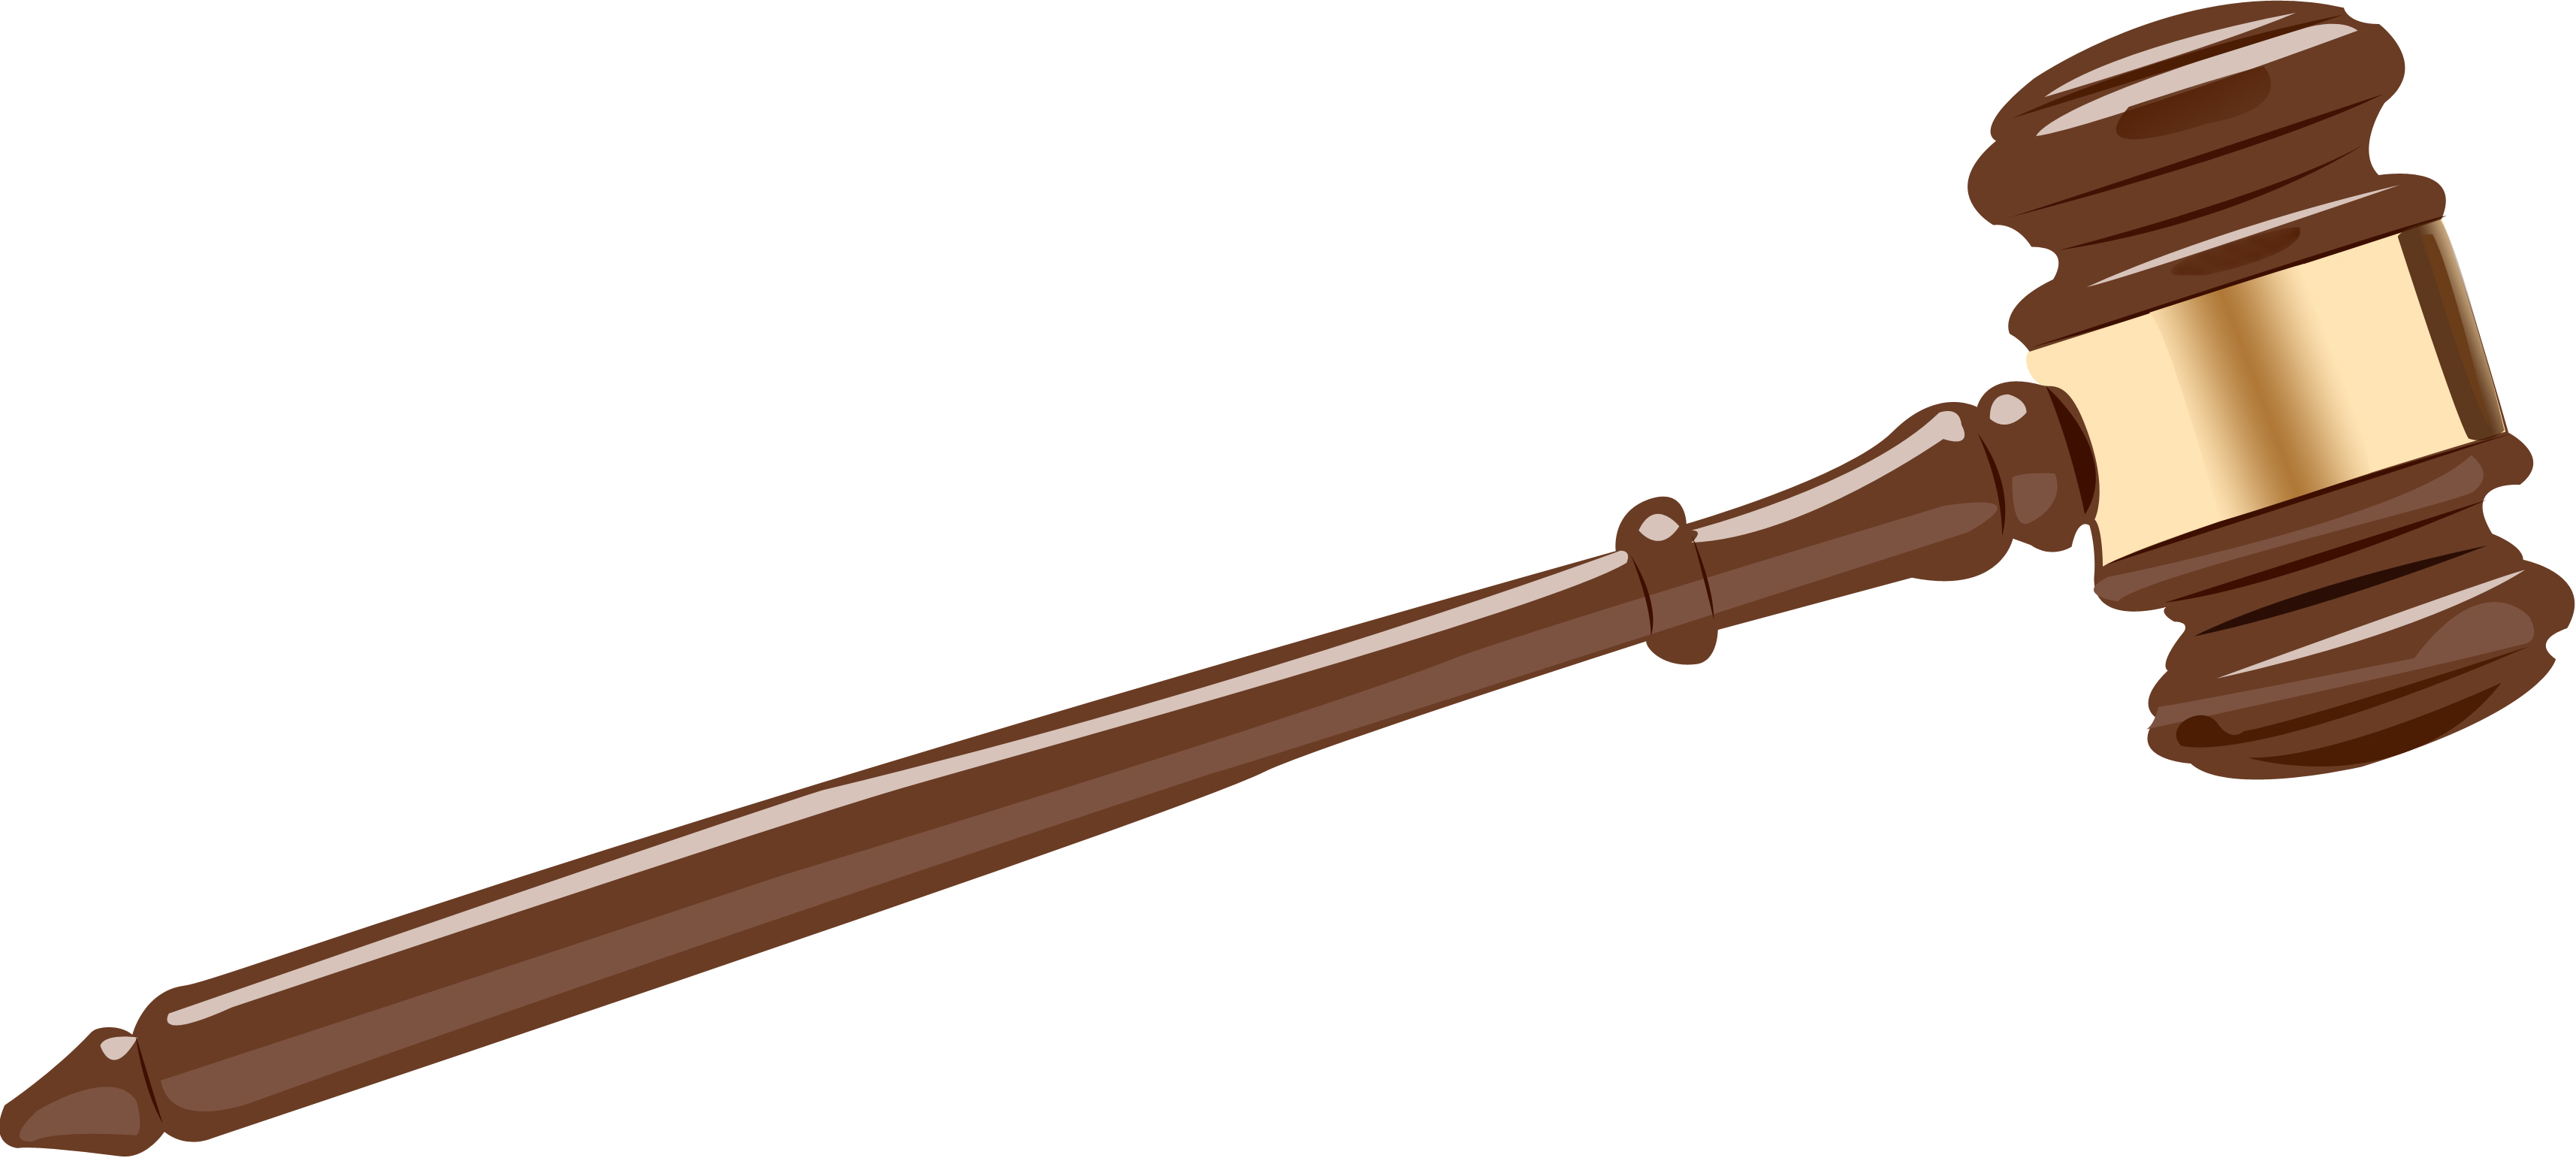 Clipart gavel vector magz free download vector graphics image ...